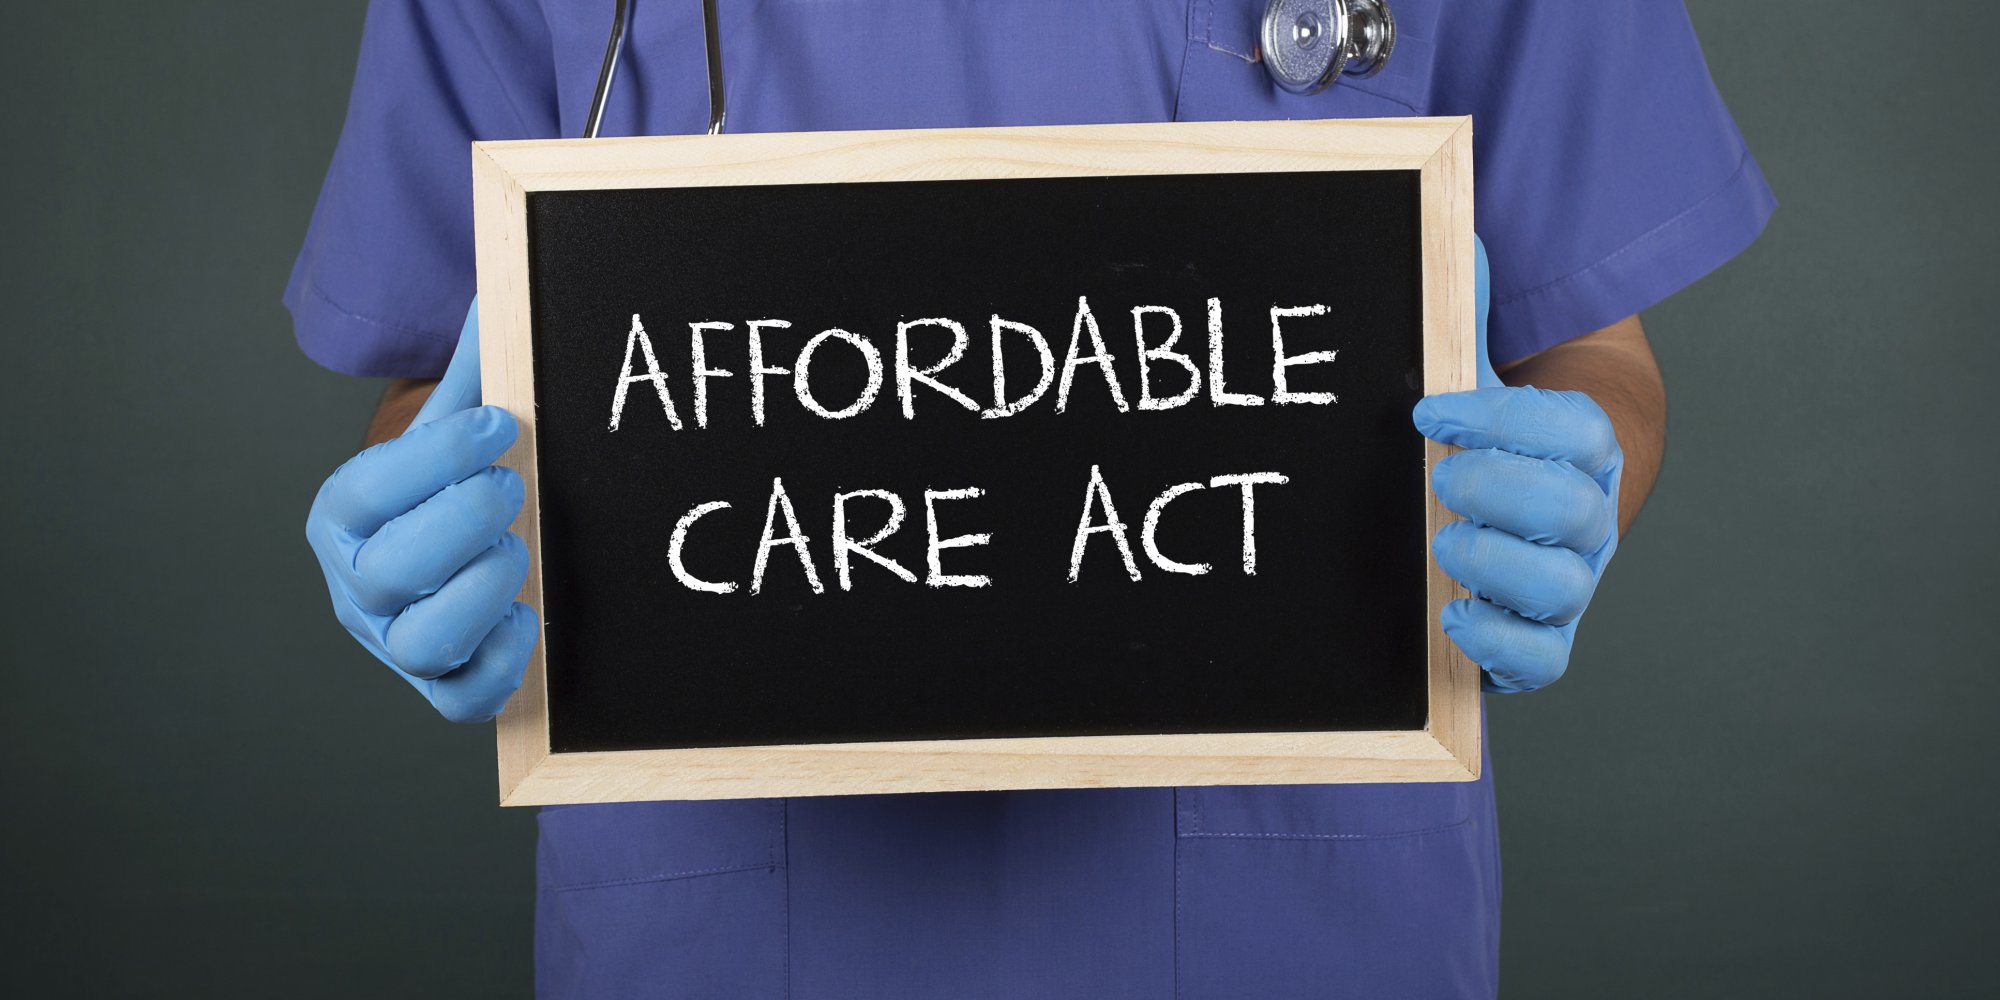 Medicare Health Care and Affordable Care Act